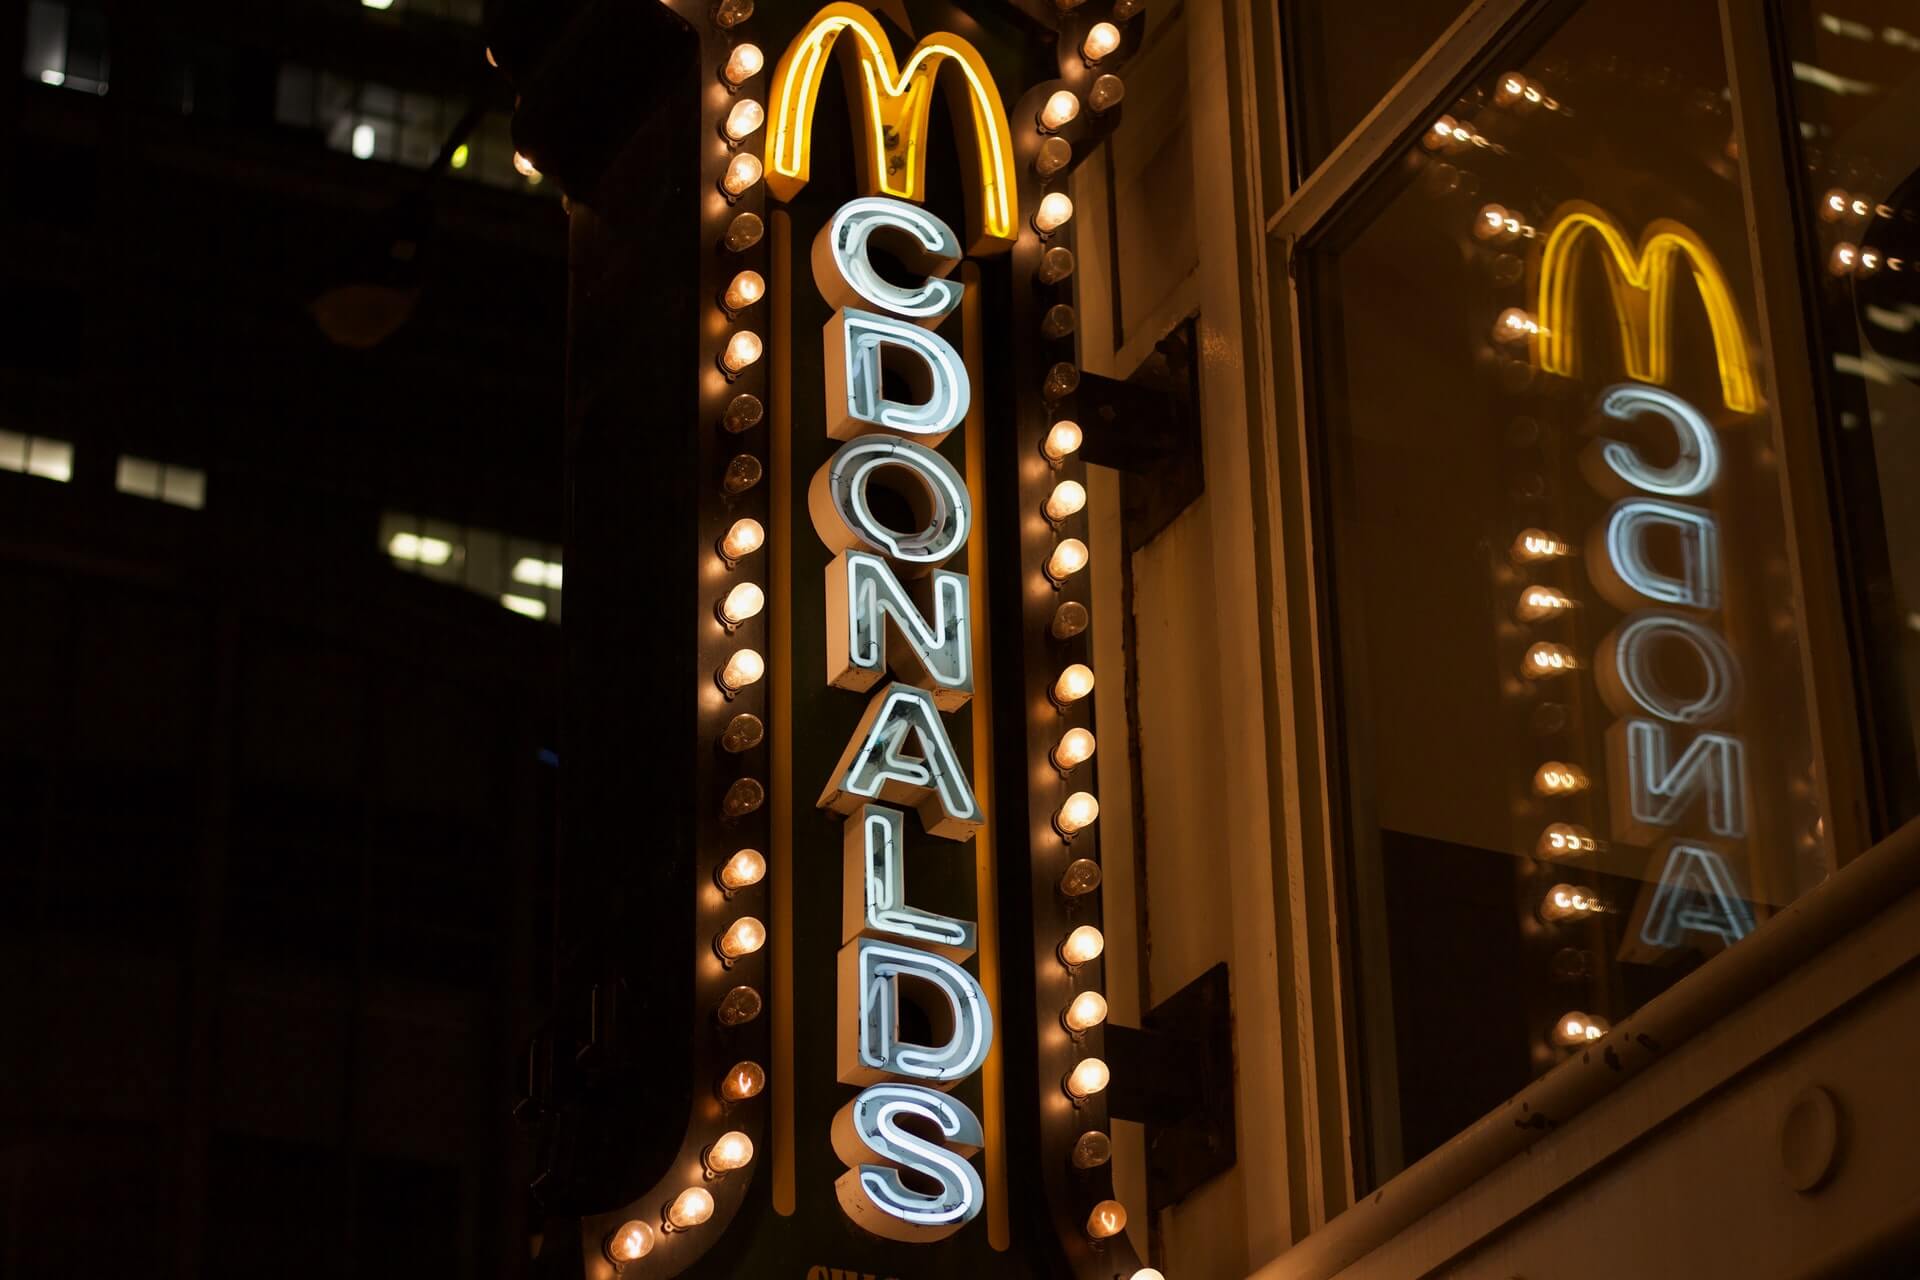 Broadway-style McDonald's sign in Chicago, Illinois